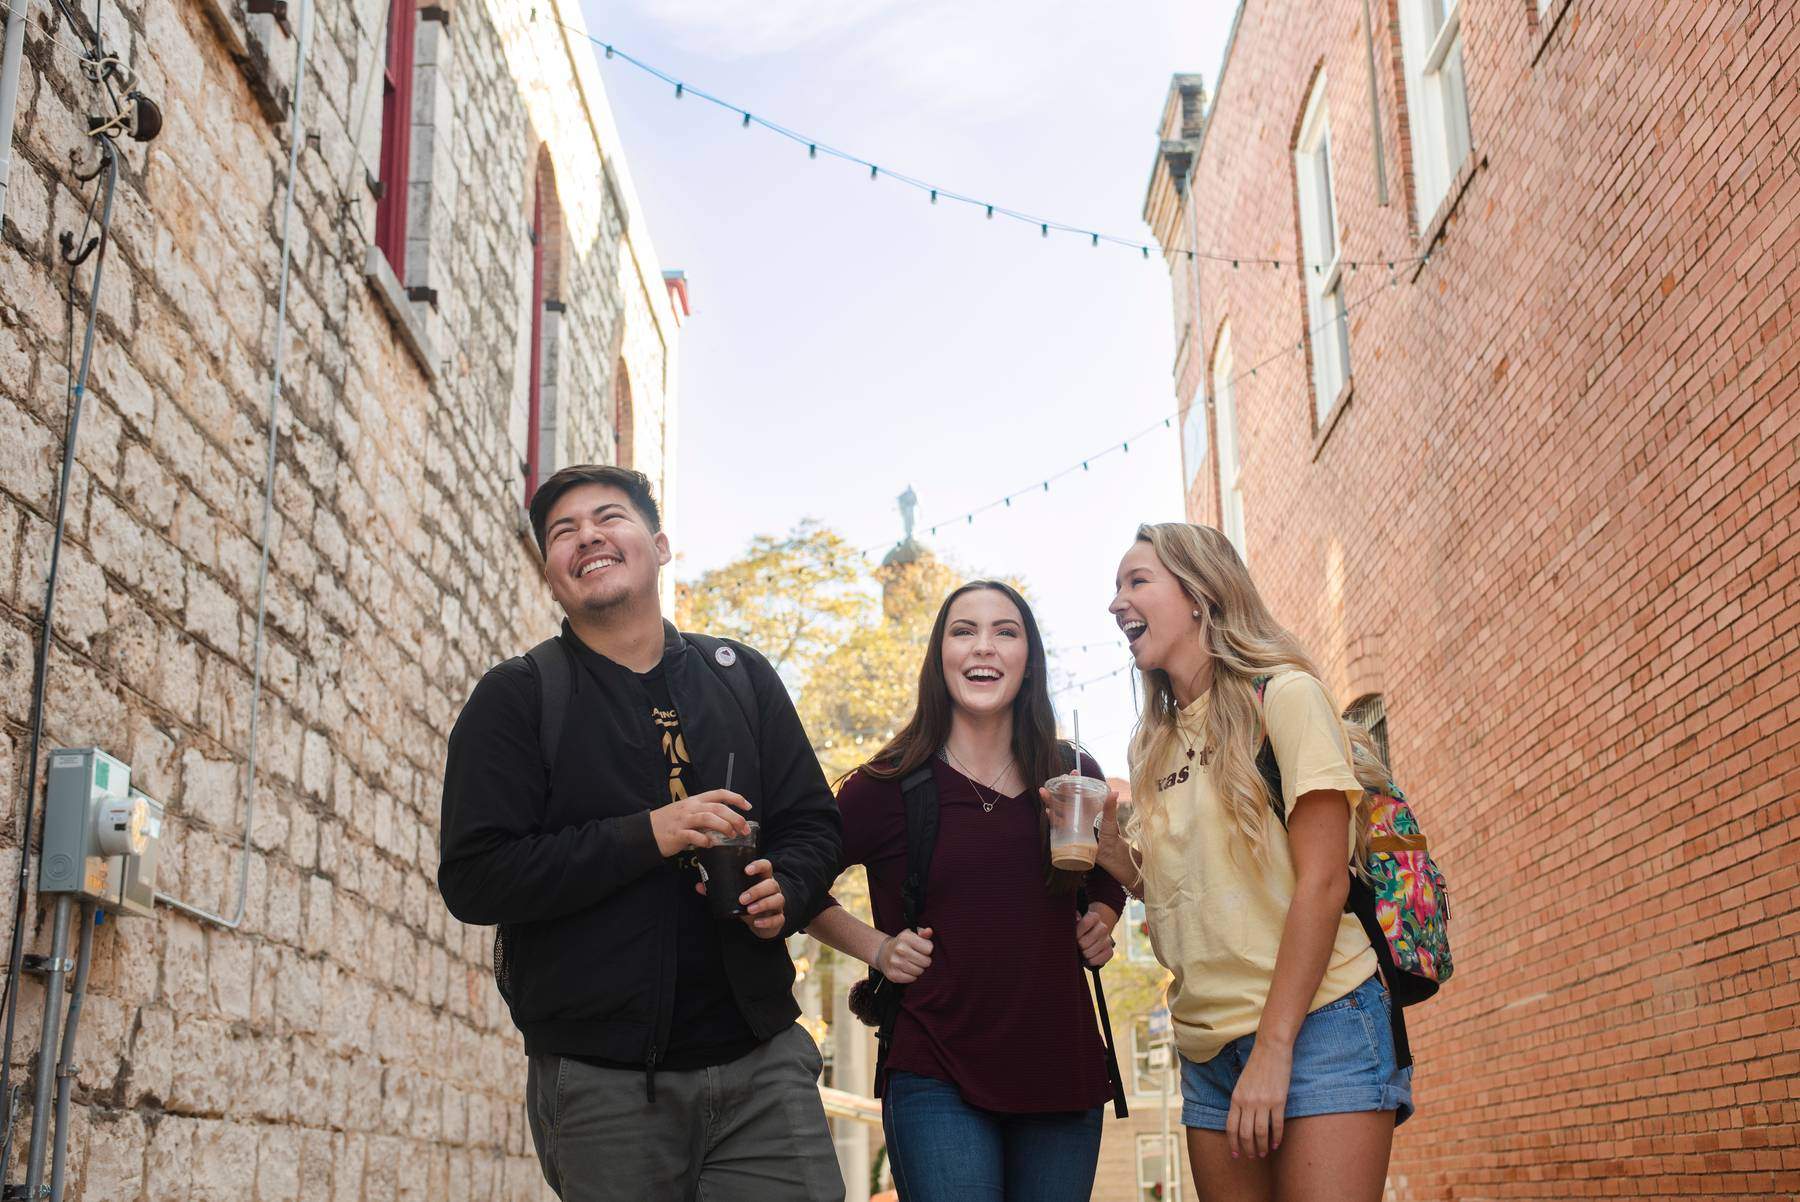 Three students in an alley between two brick buildings.